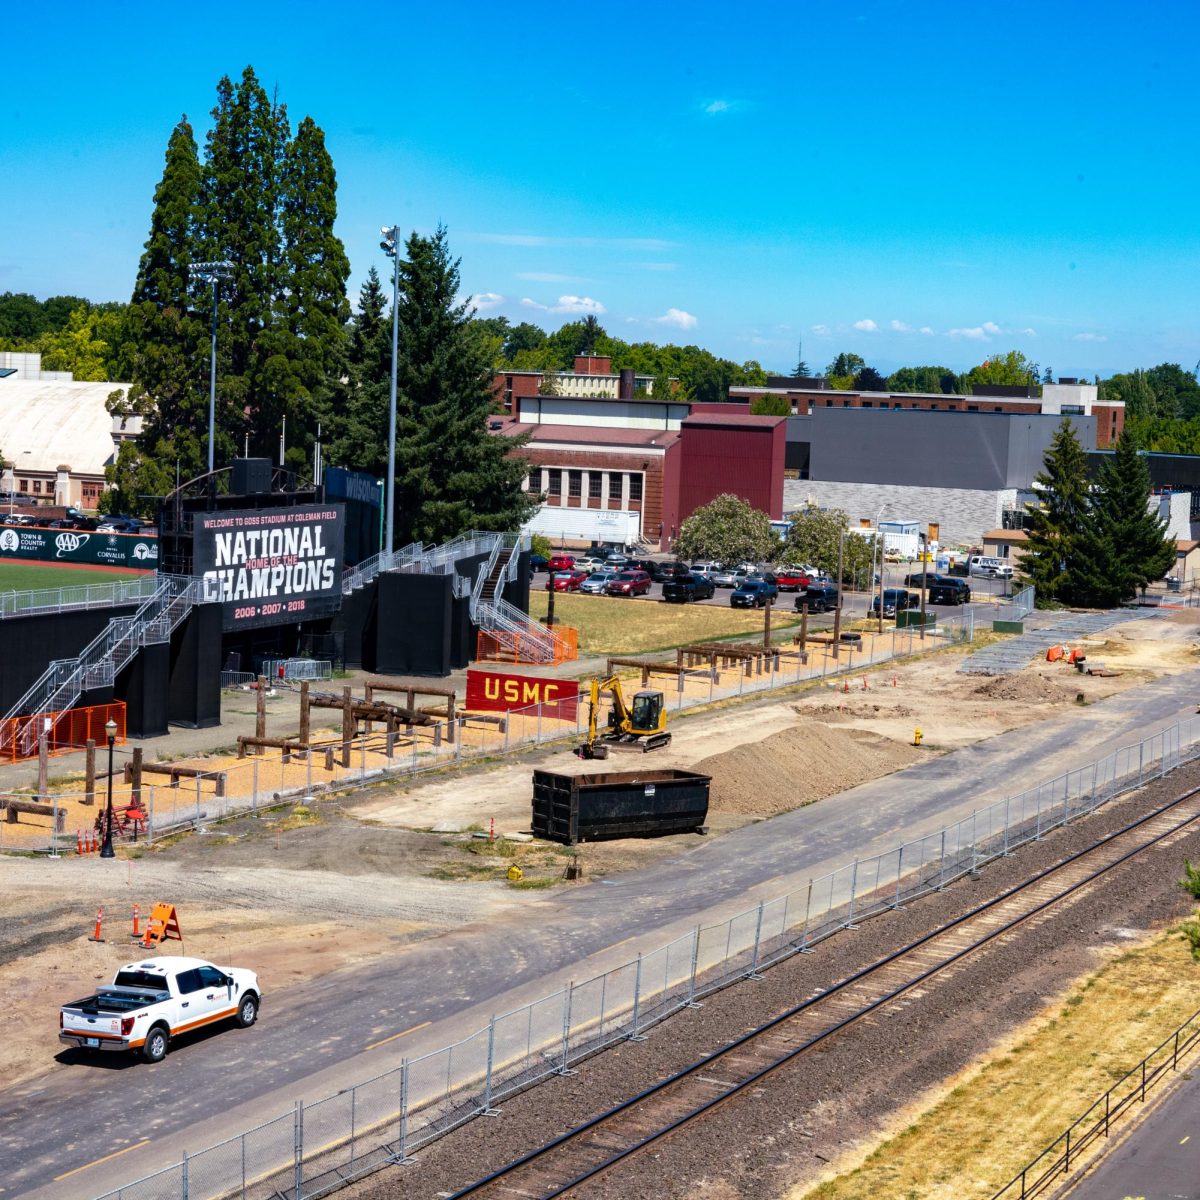 Photograph of the construction of the Oregon State University Baseball Hitting Facility near Goss Stadium, photographed on July 12 in Corvallis. The new baseball hitting facility is set to be around 9,600 square feet with a new mezzanine level, batting cages, meeting rooms and weight room.